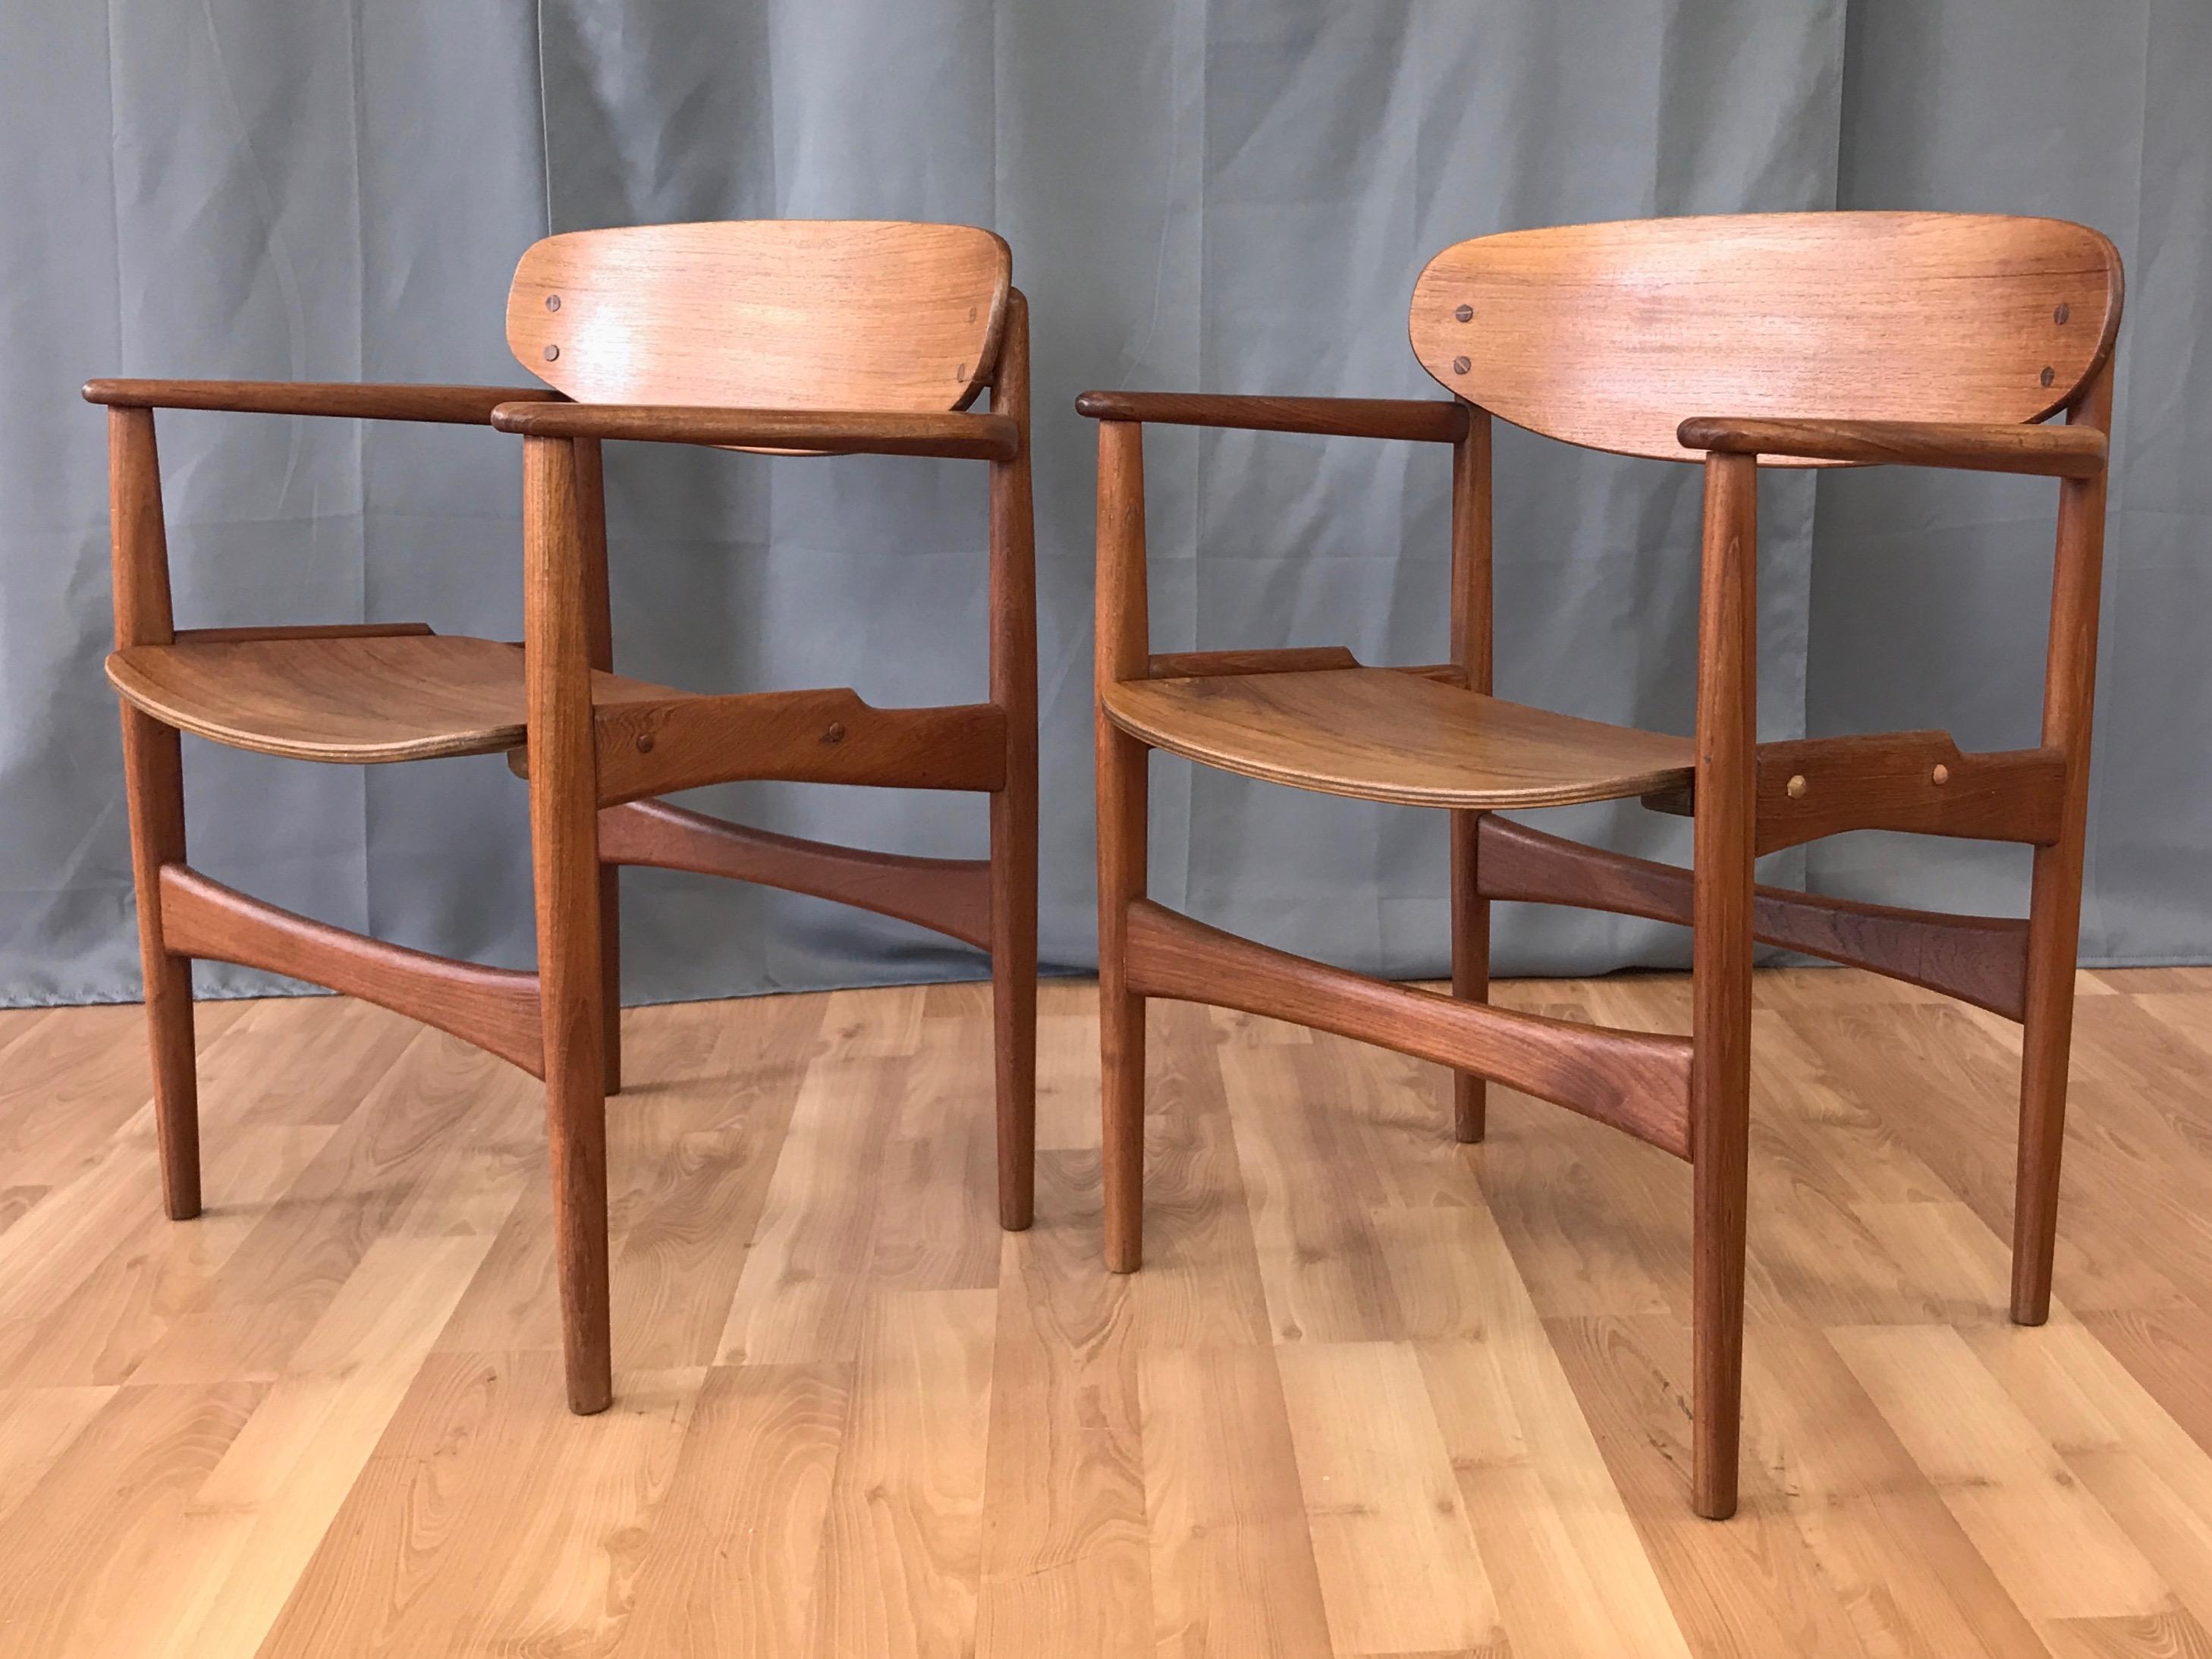 A pair of rare 1950s Danish teak armchairs by architect and designer Arne Hovmand-Olsen for Jutex.

Excellent craftsmanship and details on display throughout. Solid teak frame with sculpted arms, gunstock side stretchers, and tapered front and back